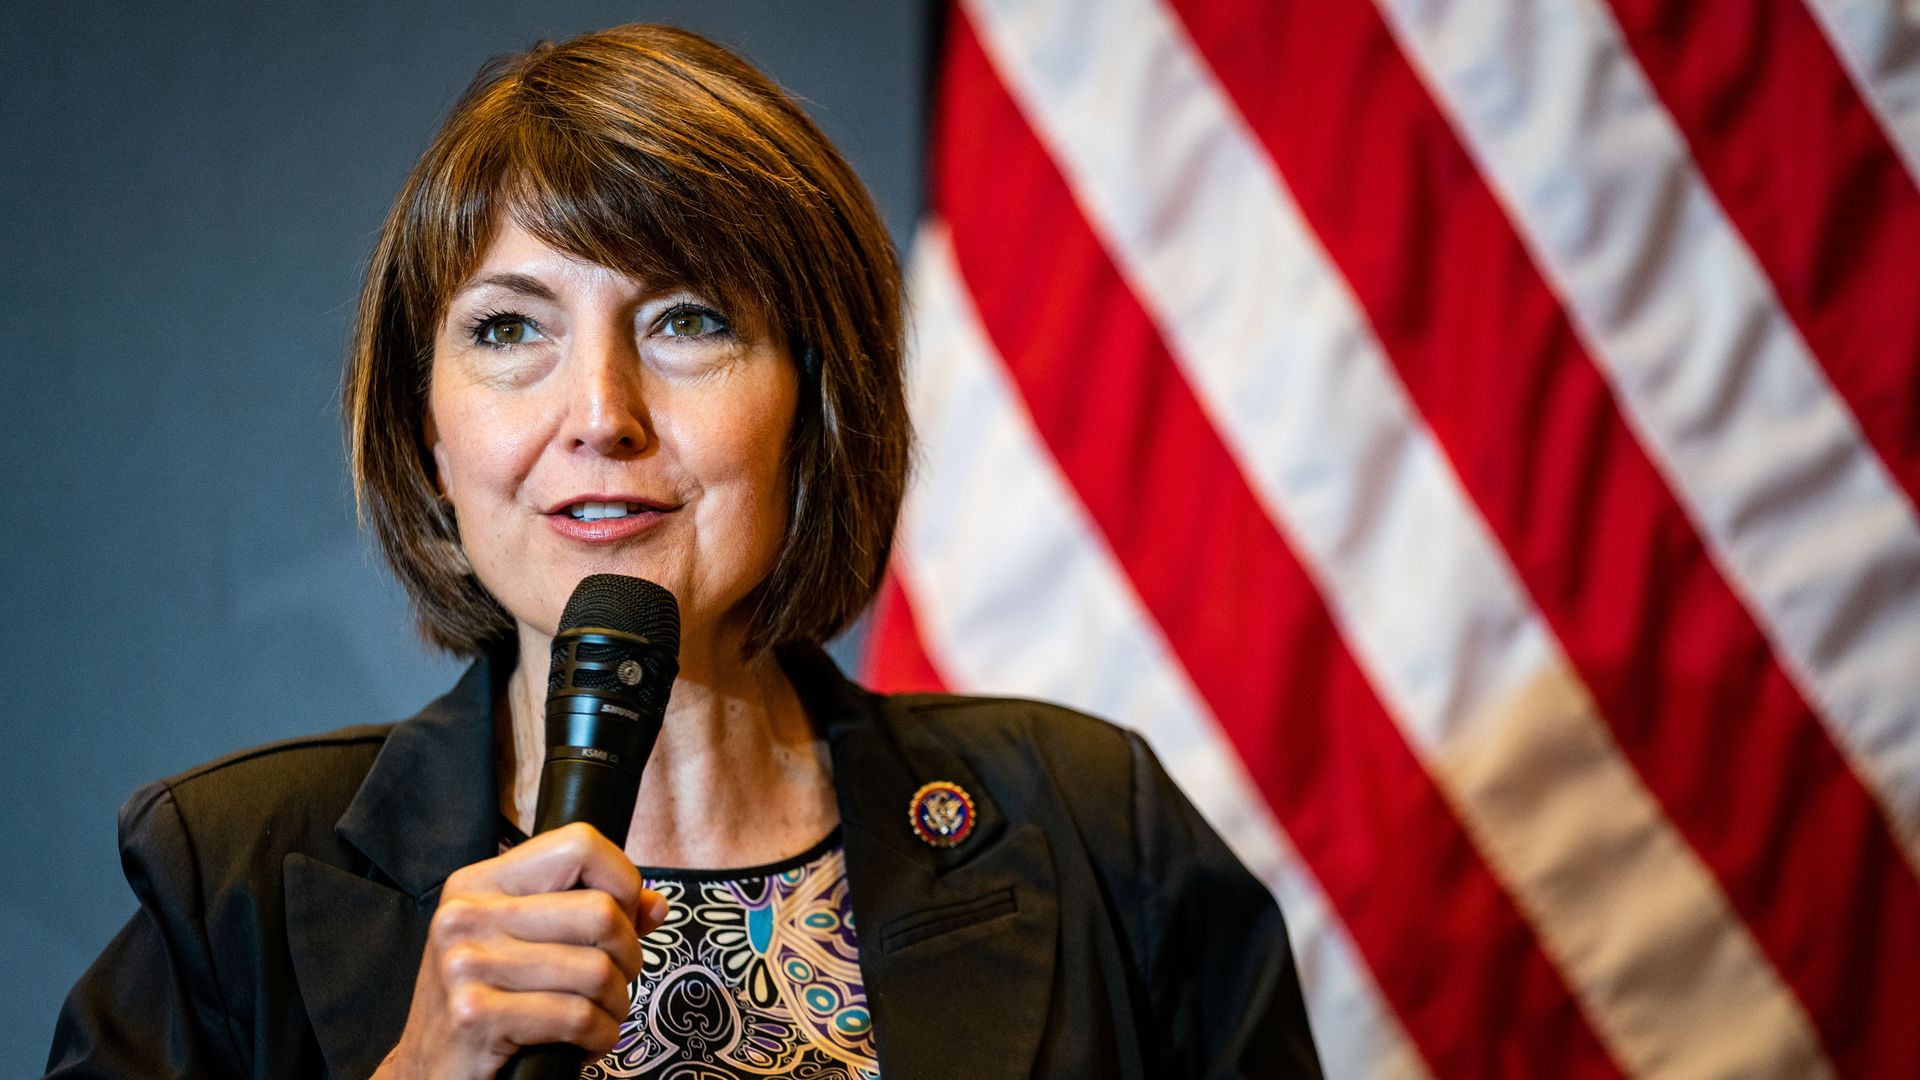 Cathy McMorris Rodgers speaks in front of an American flag